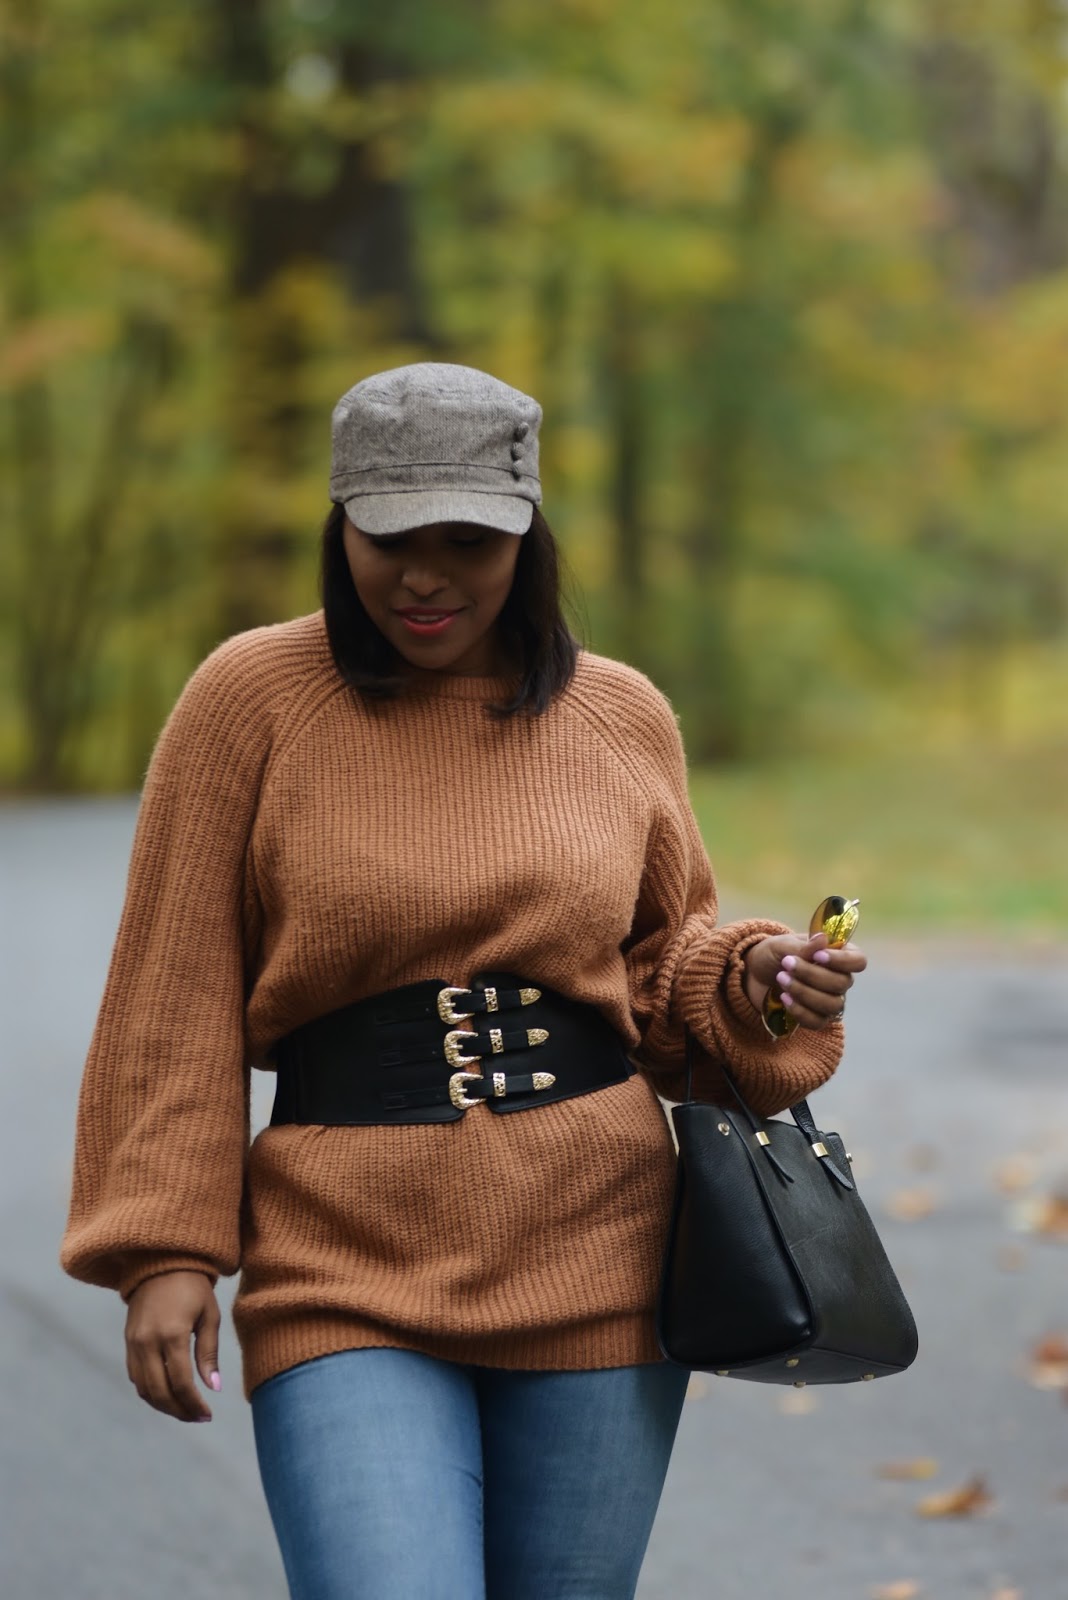 Fall foilage, fall outfits, forever21 sweaters, casual fall outfits, waist belts, rock creek park, dc bloggers, dominican bloggers